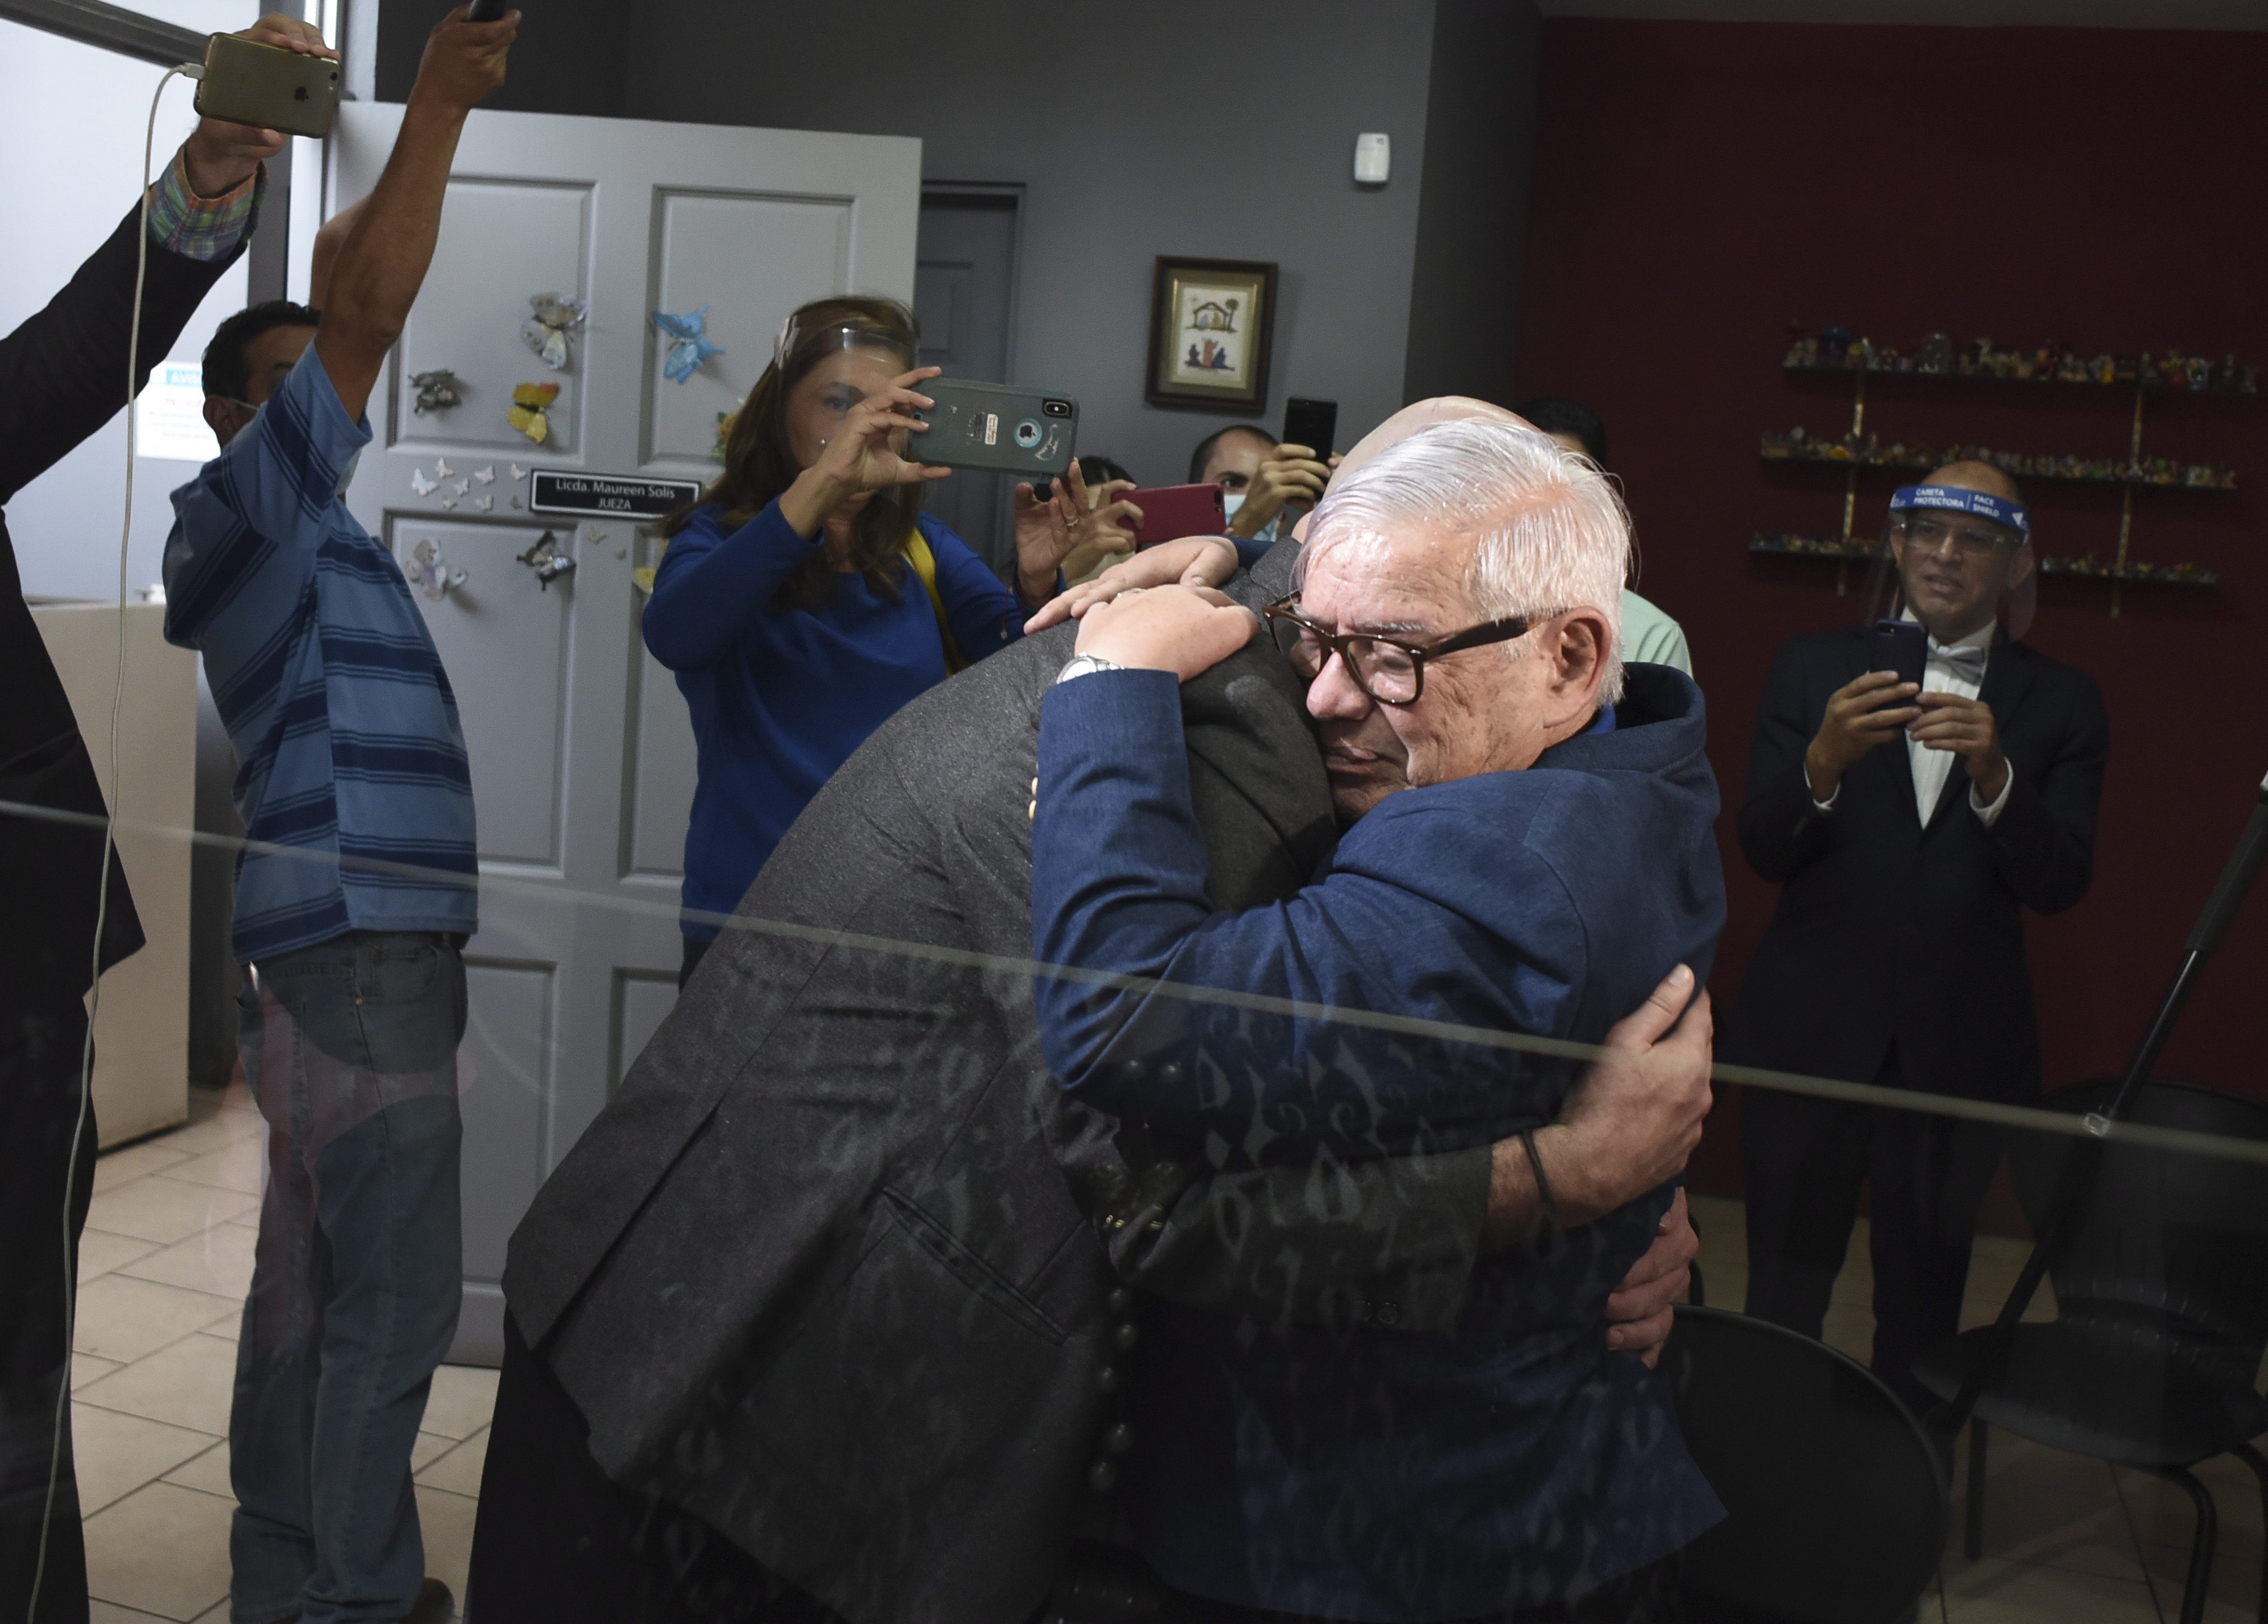 Activist Marco Castillo (right) embraces his husband Rodrigo Campos after they were married before a judge in San José, Costa Rica, on May 26, 2020, the day same-sex marriage became legal in the country.